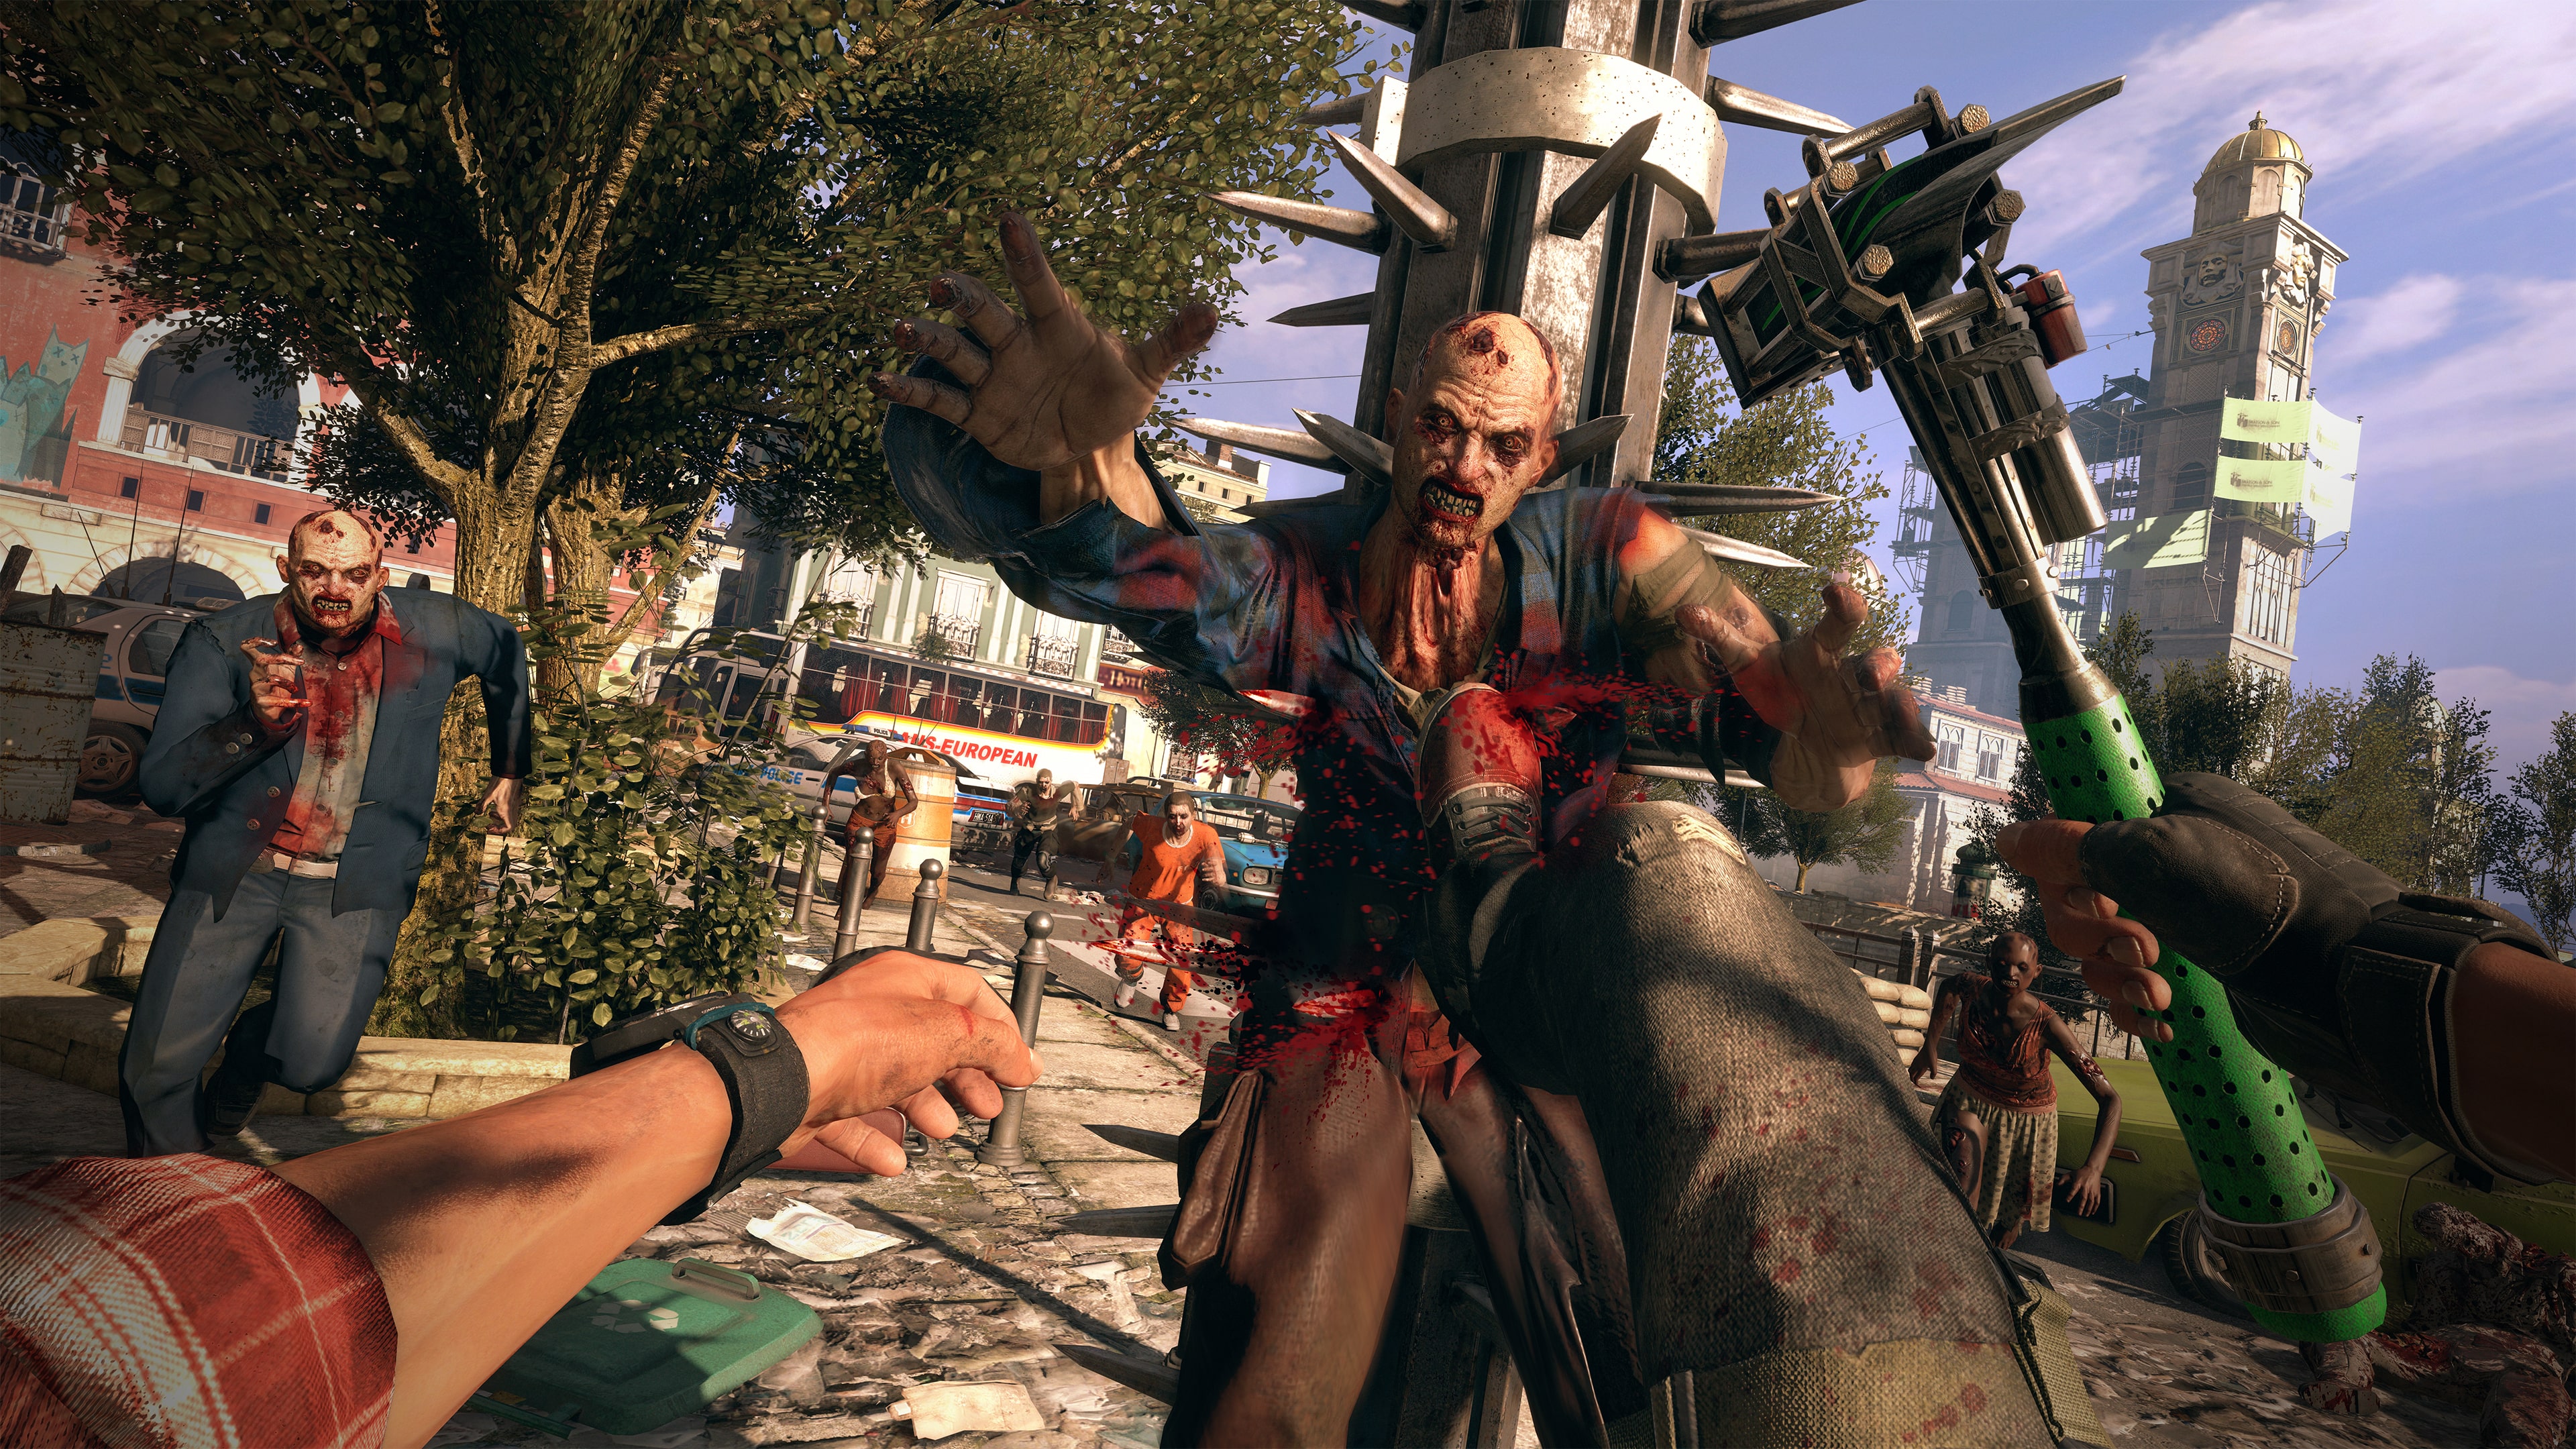 Dying Light The Following Enhanced Edition On Playstation 4 PS4